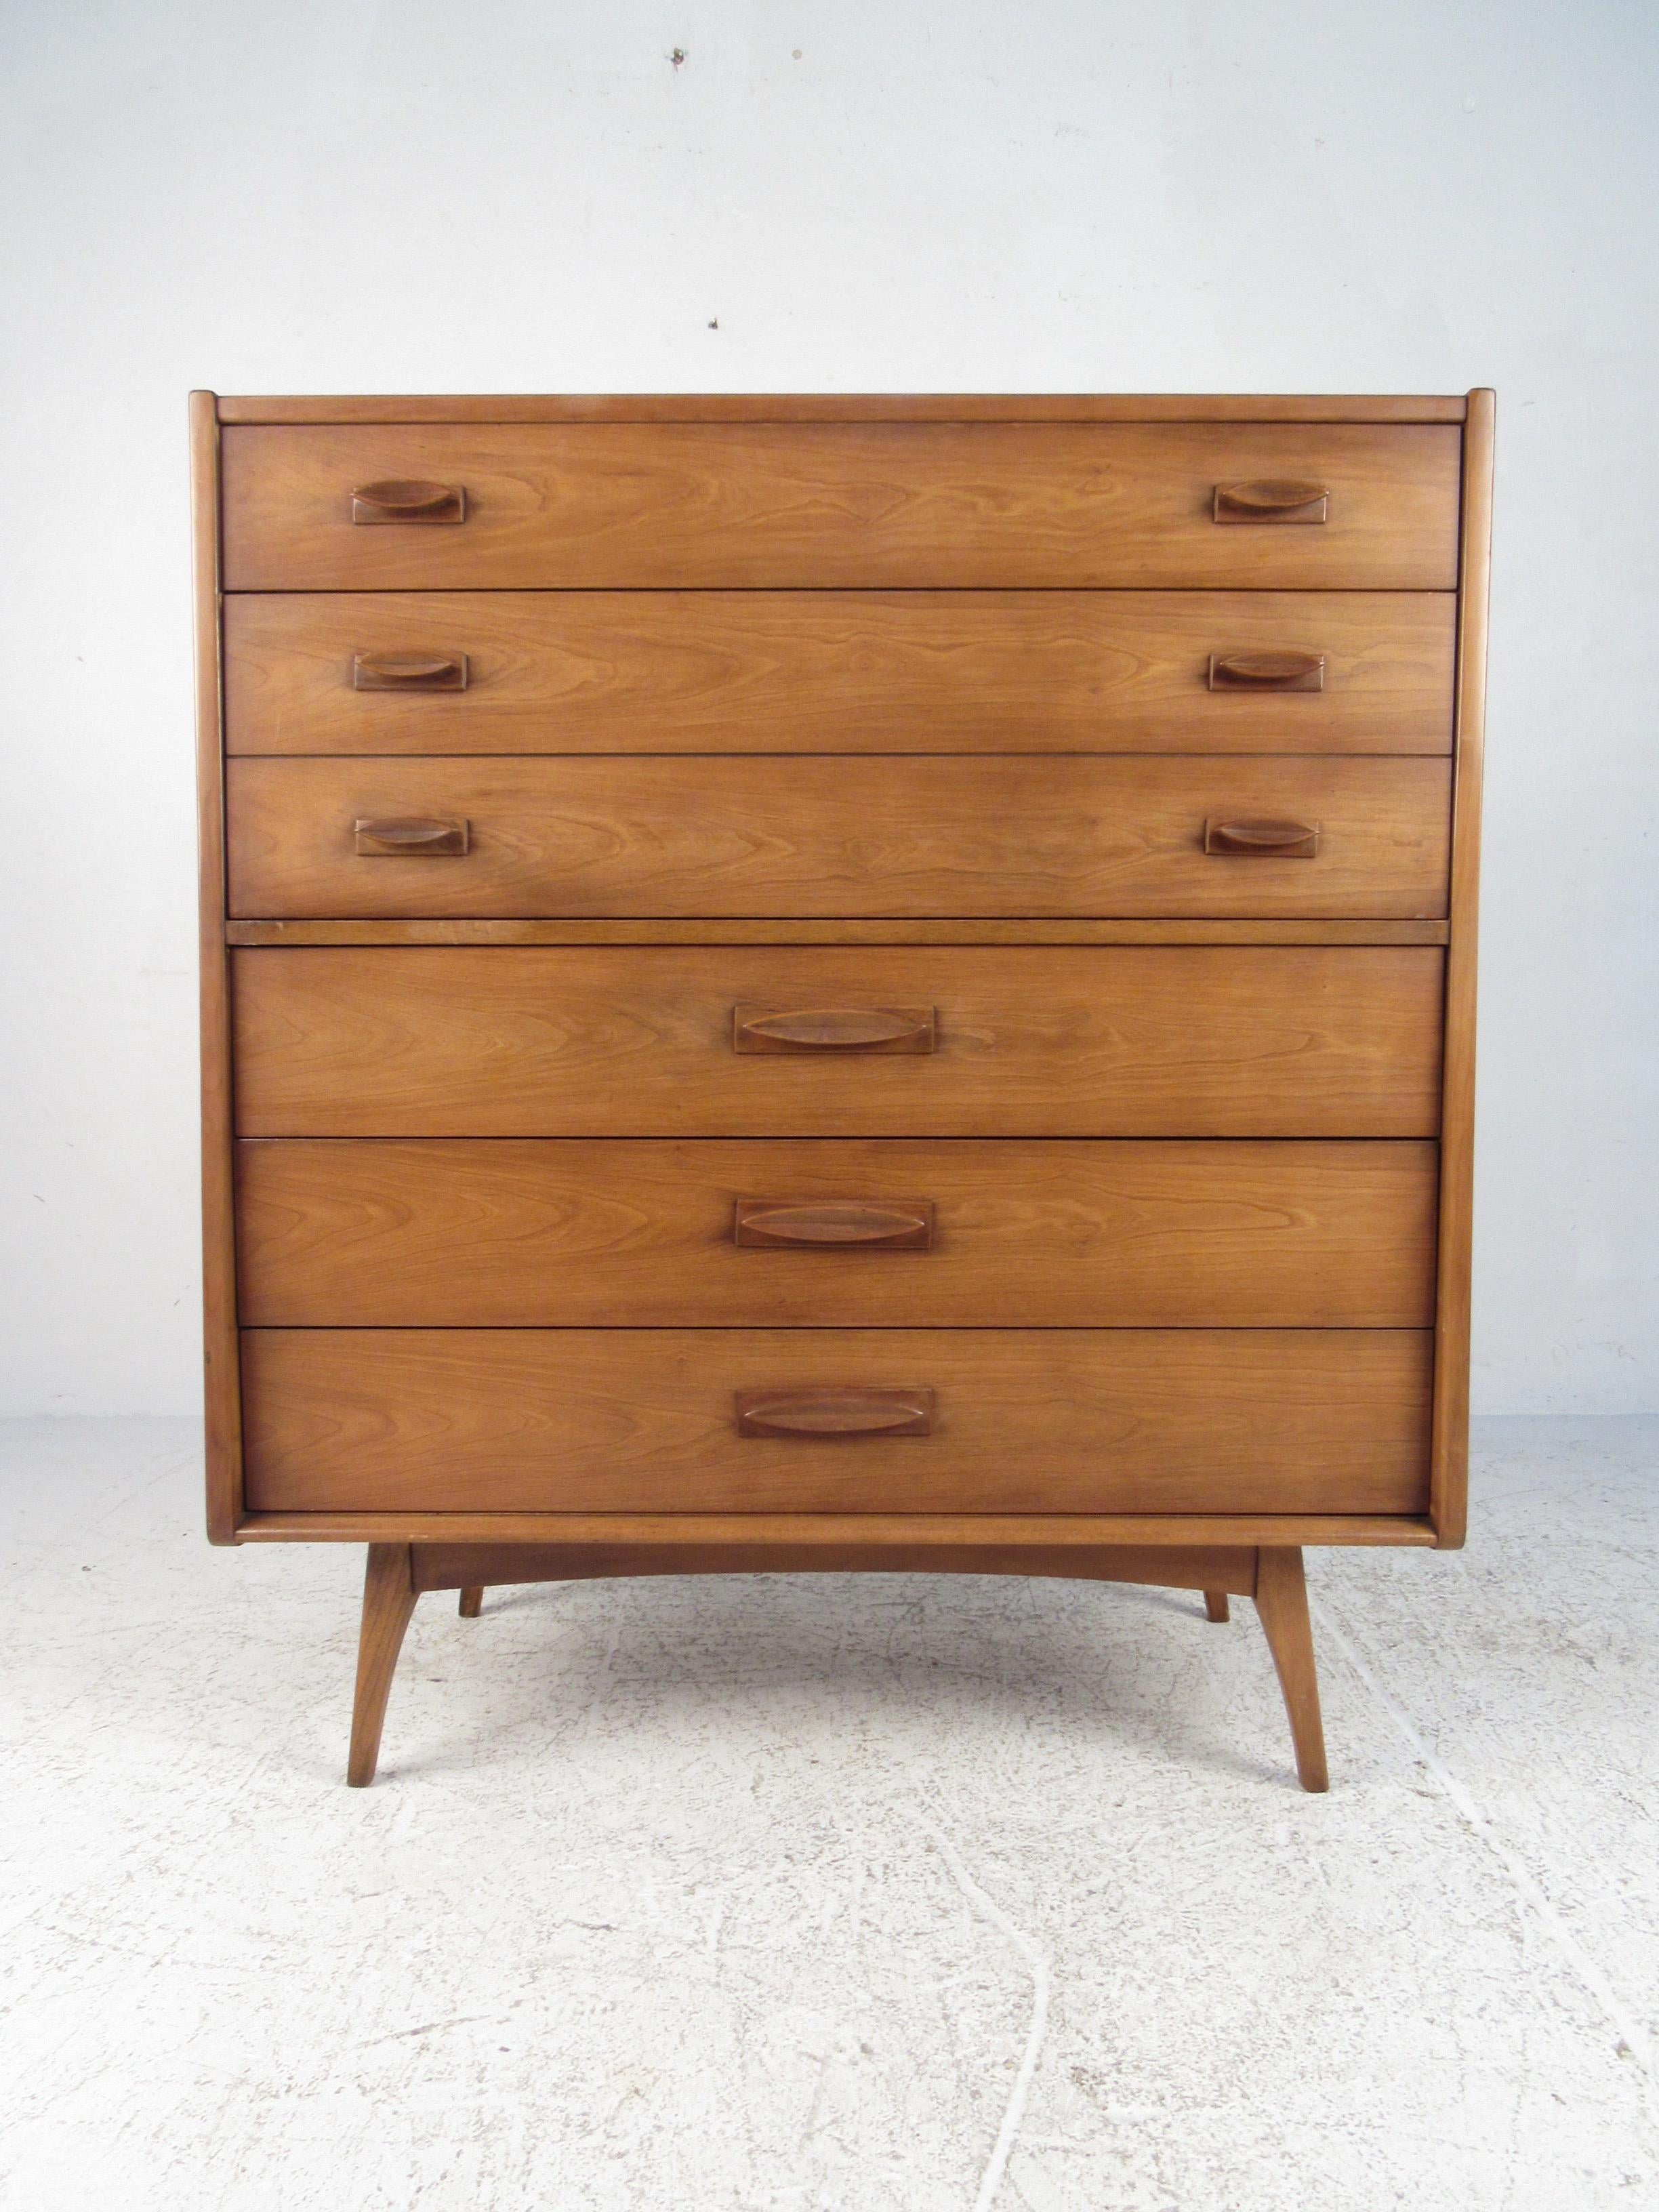 This beautiful Mid-Century Modern highboy dresser has wonderful matching drawer pulls and simple, modern lines. Plenty of stylish storage for any bedroom. “Contact dealer” for more photos or information on individual pieces, please confirm item